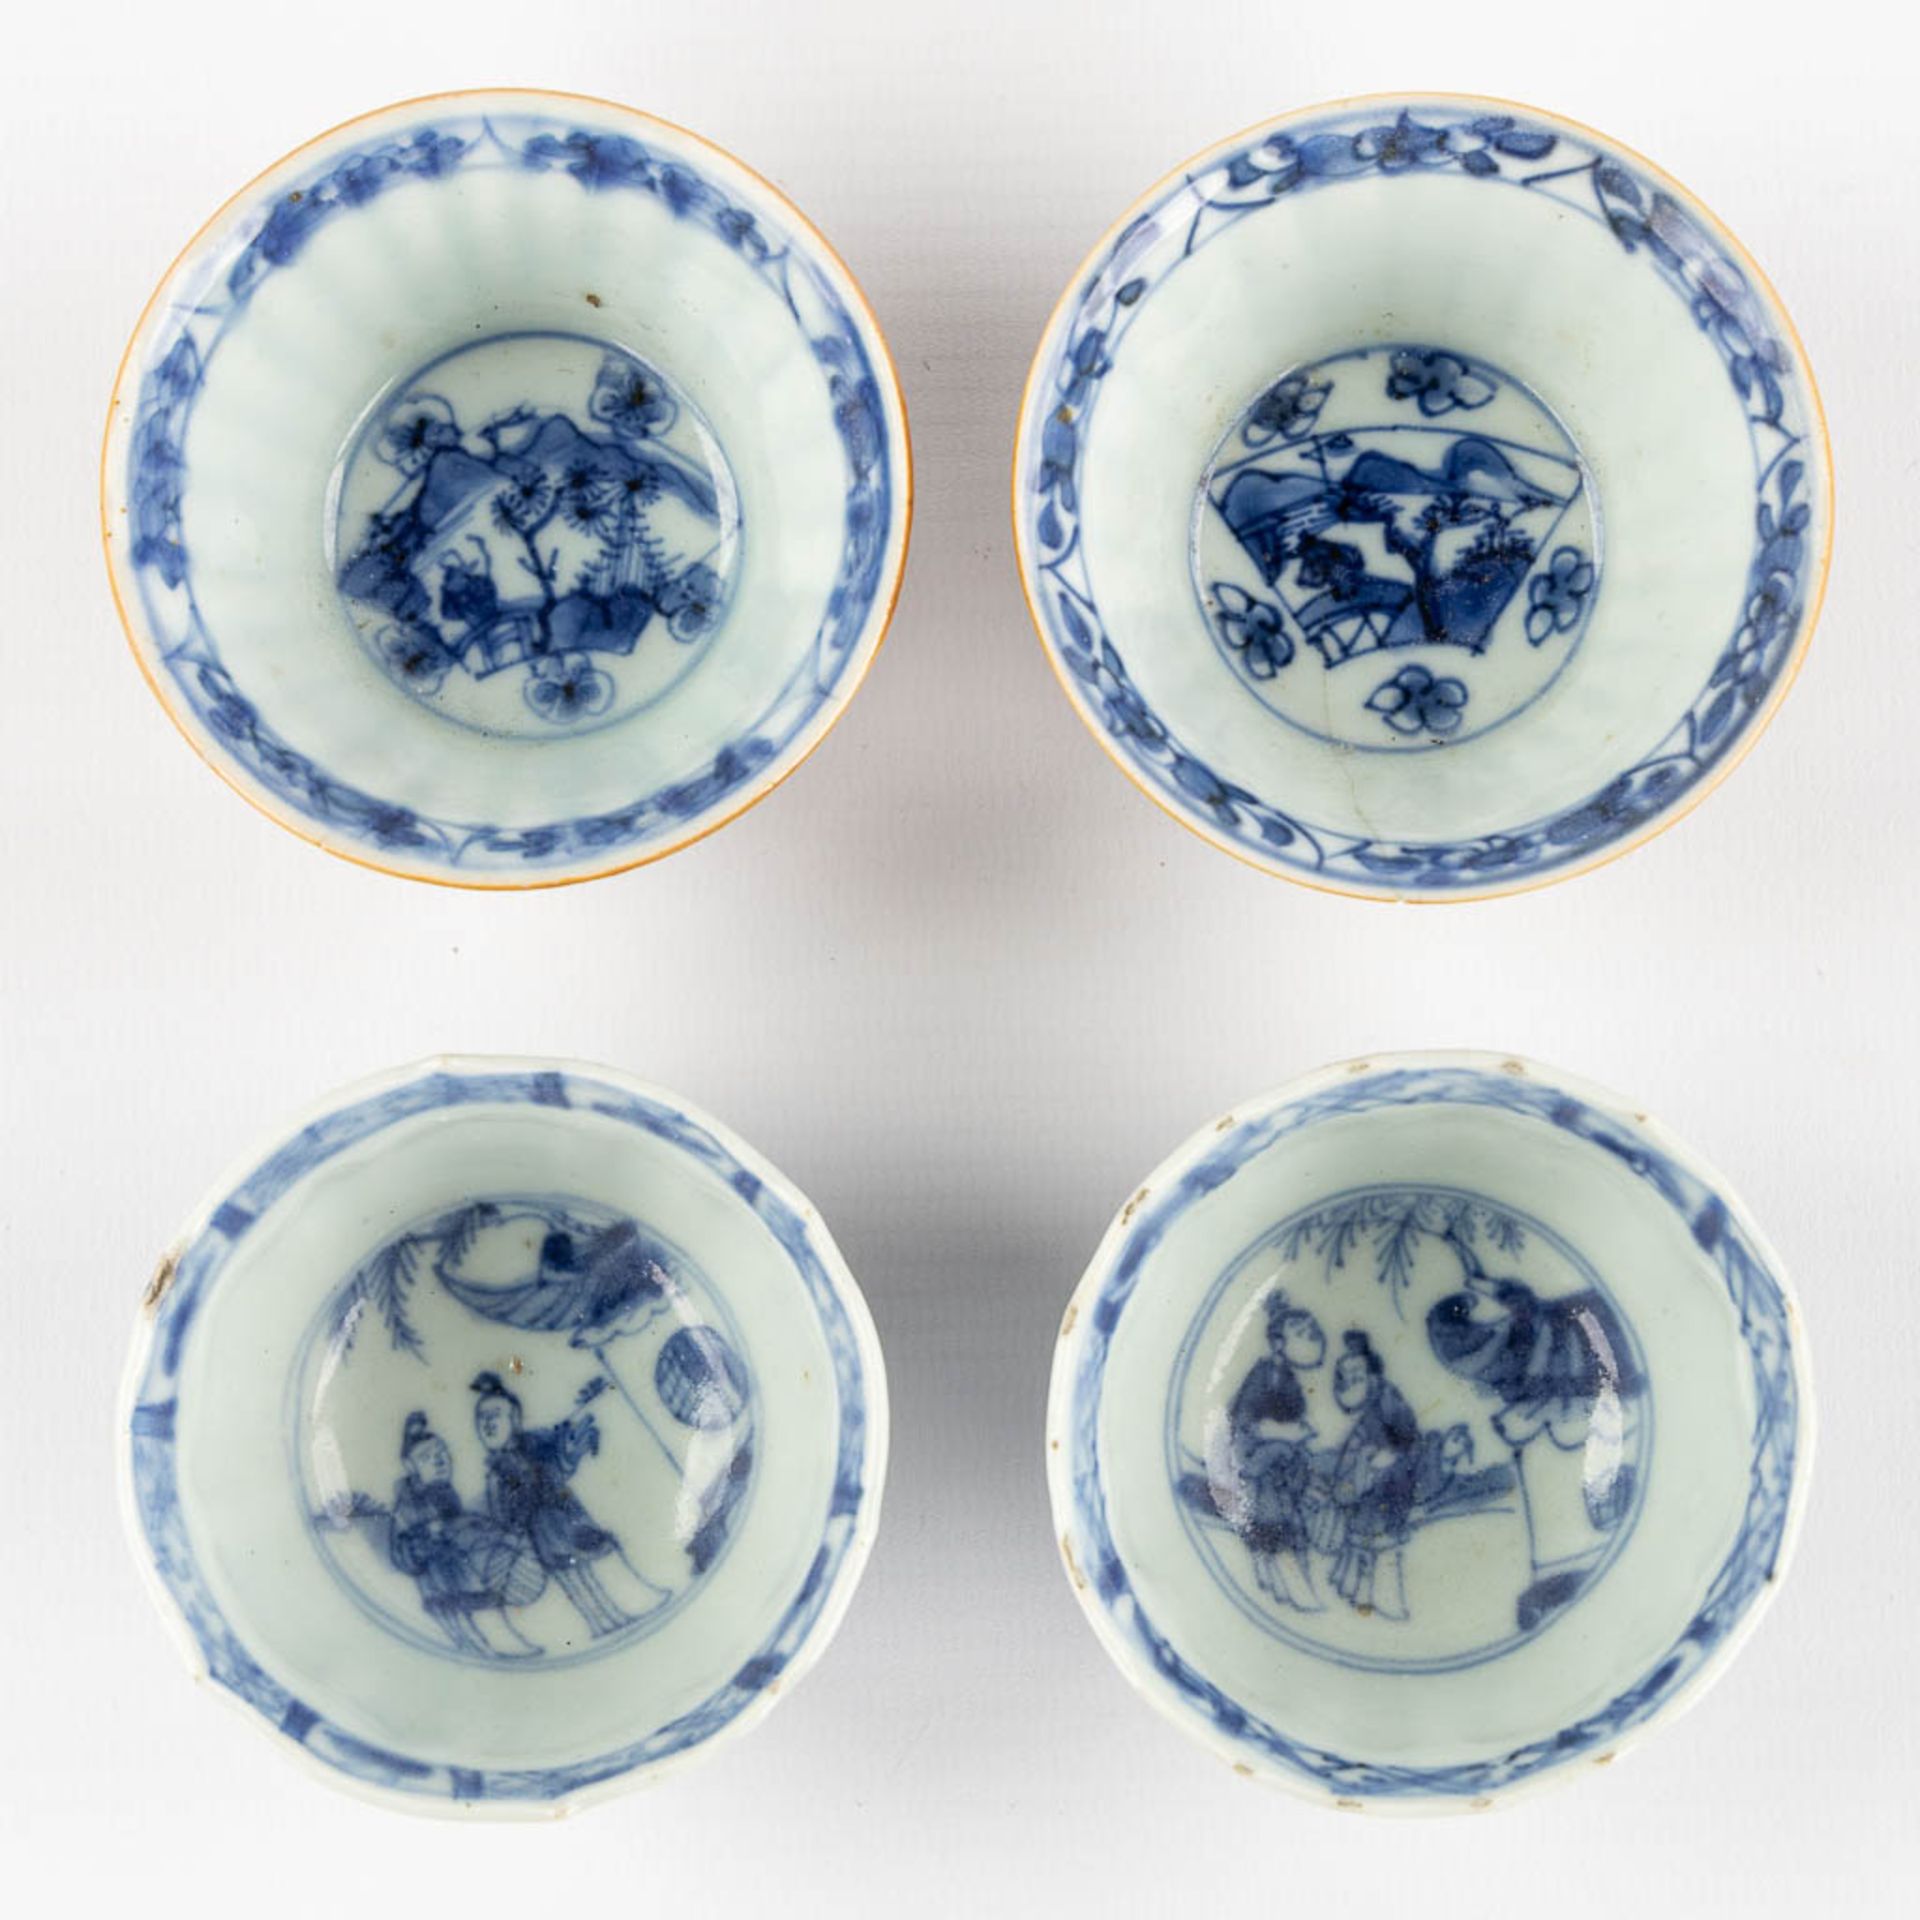 Fifteen Chinese cups, saucers and plates, blue white and Famille Roze. (D:23,4 cm) - Bild 13 aus 15